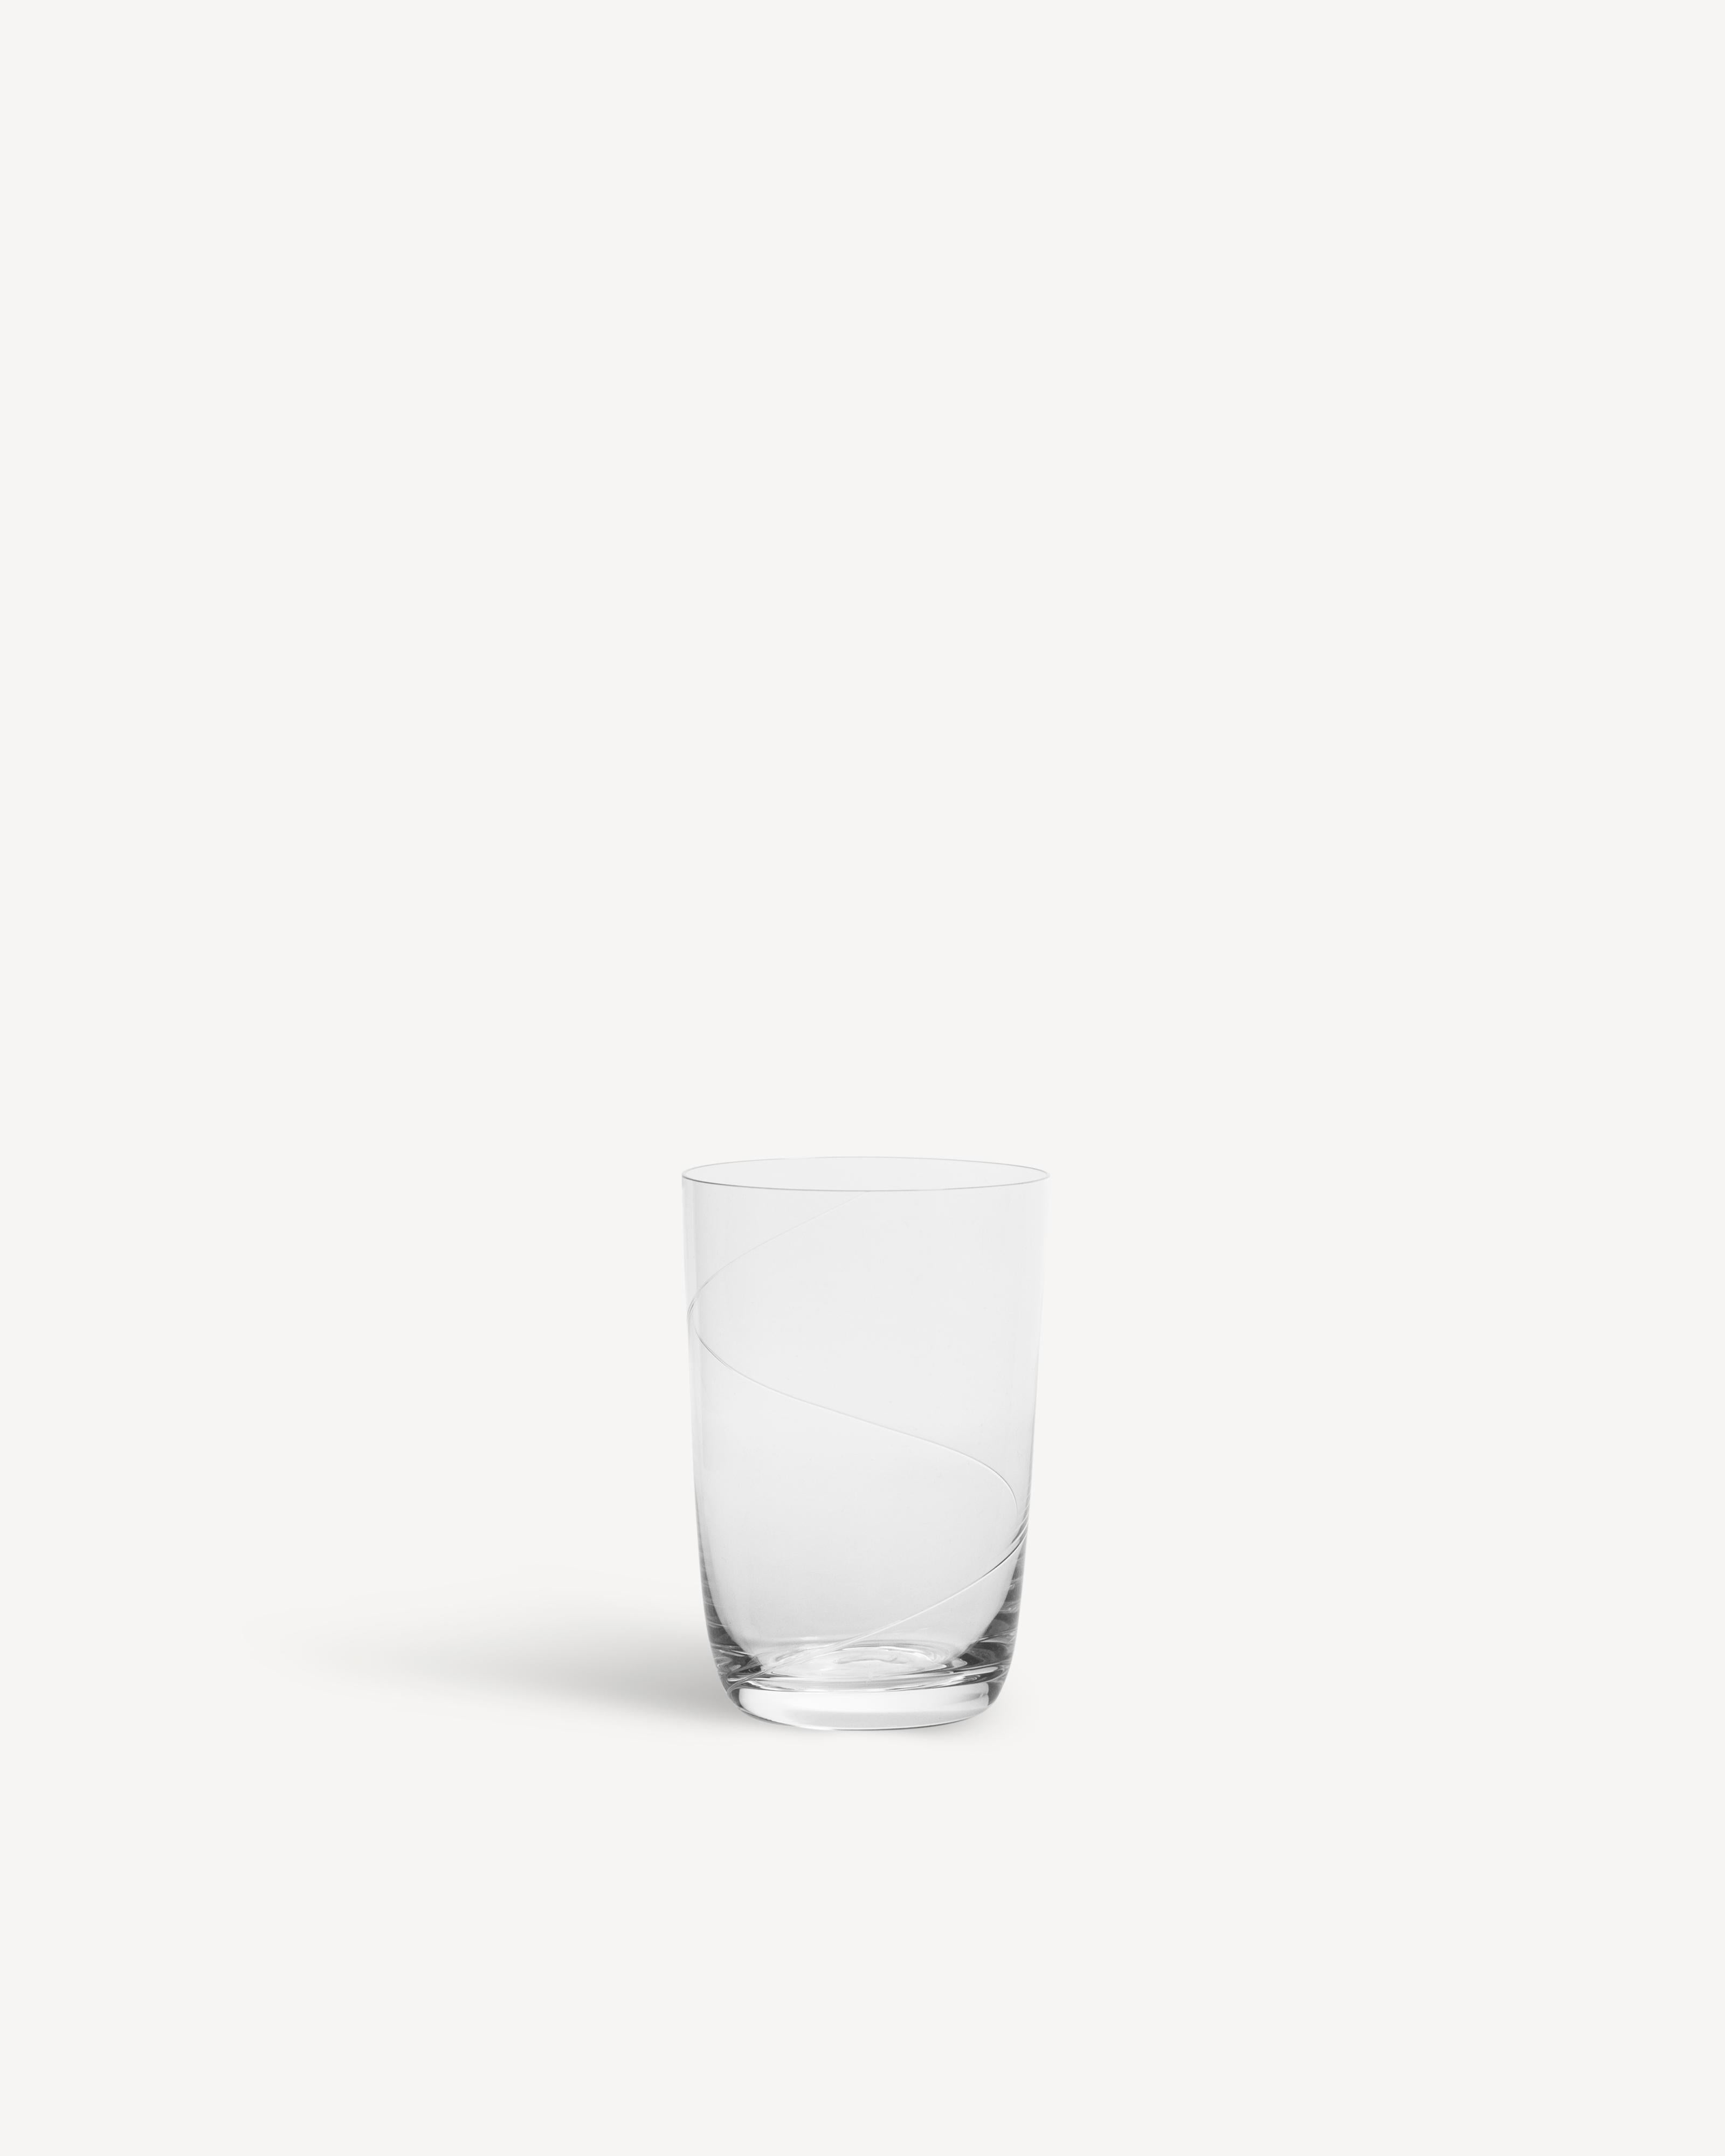 Line from Kosta Boda has been in production since 1982. The collection is unique, with a thread of spun glass applied on each product by hand – a symbol of high-quality Swedish craftsmanship from Kosta Glassworks. The mouth-blown tumbler is ideal